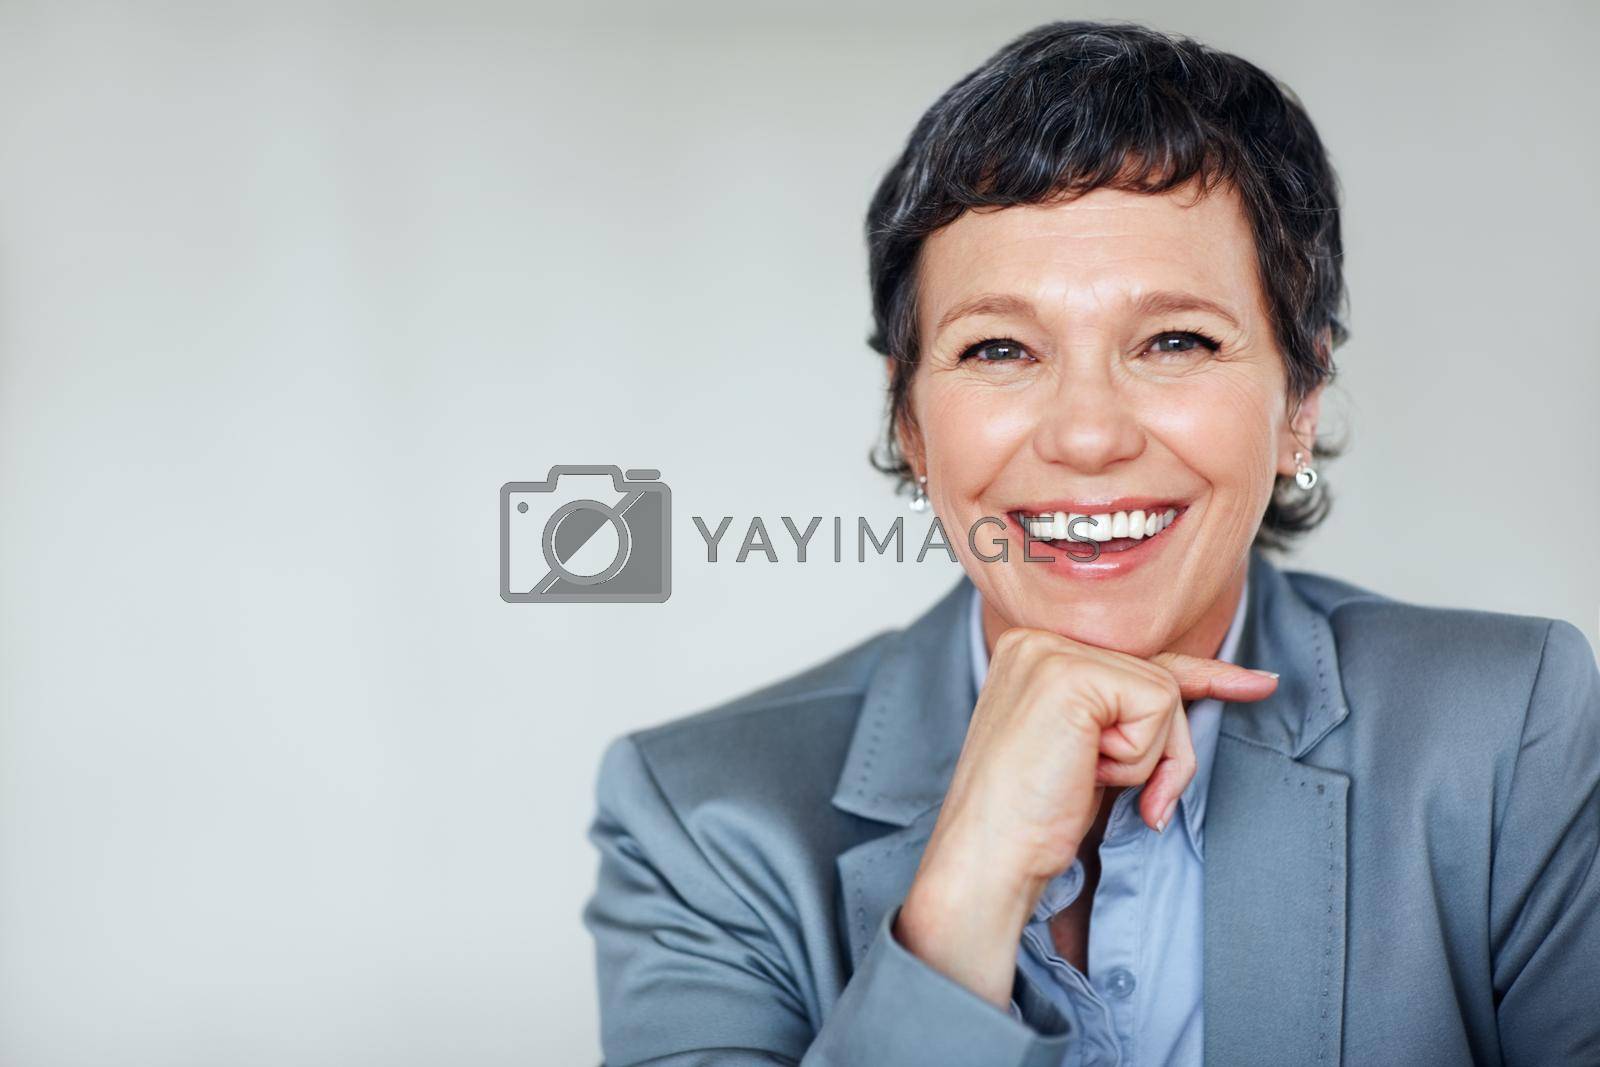 Royalty free image of Mature business woman. Portrait of happy mature business woman smiling over plain background. by YuriArcurs